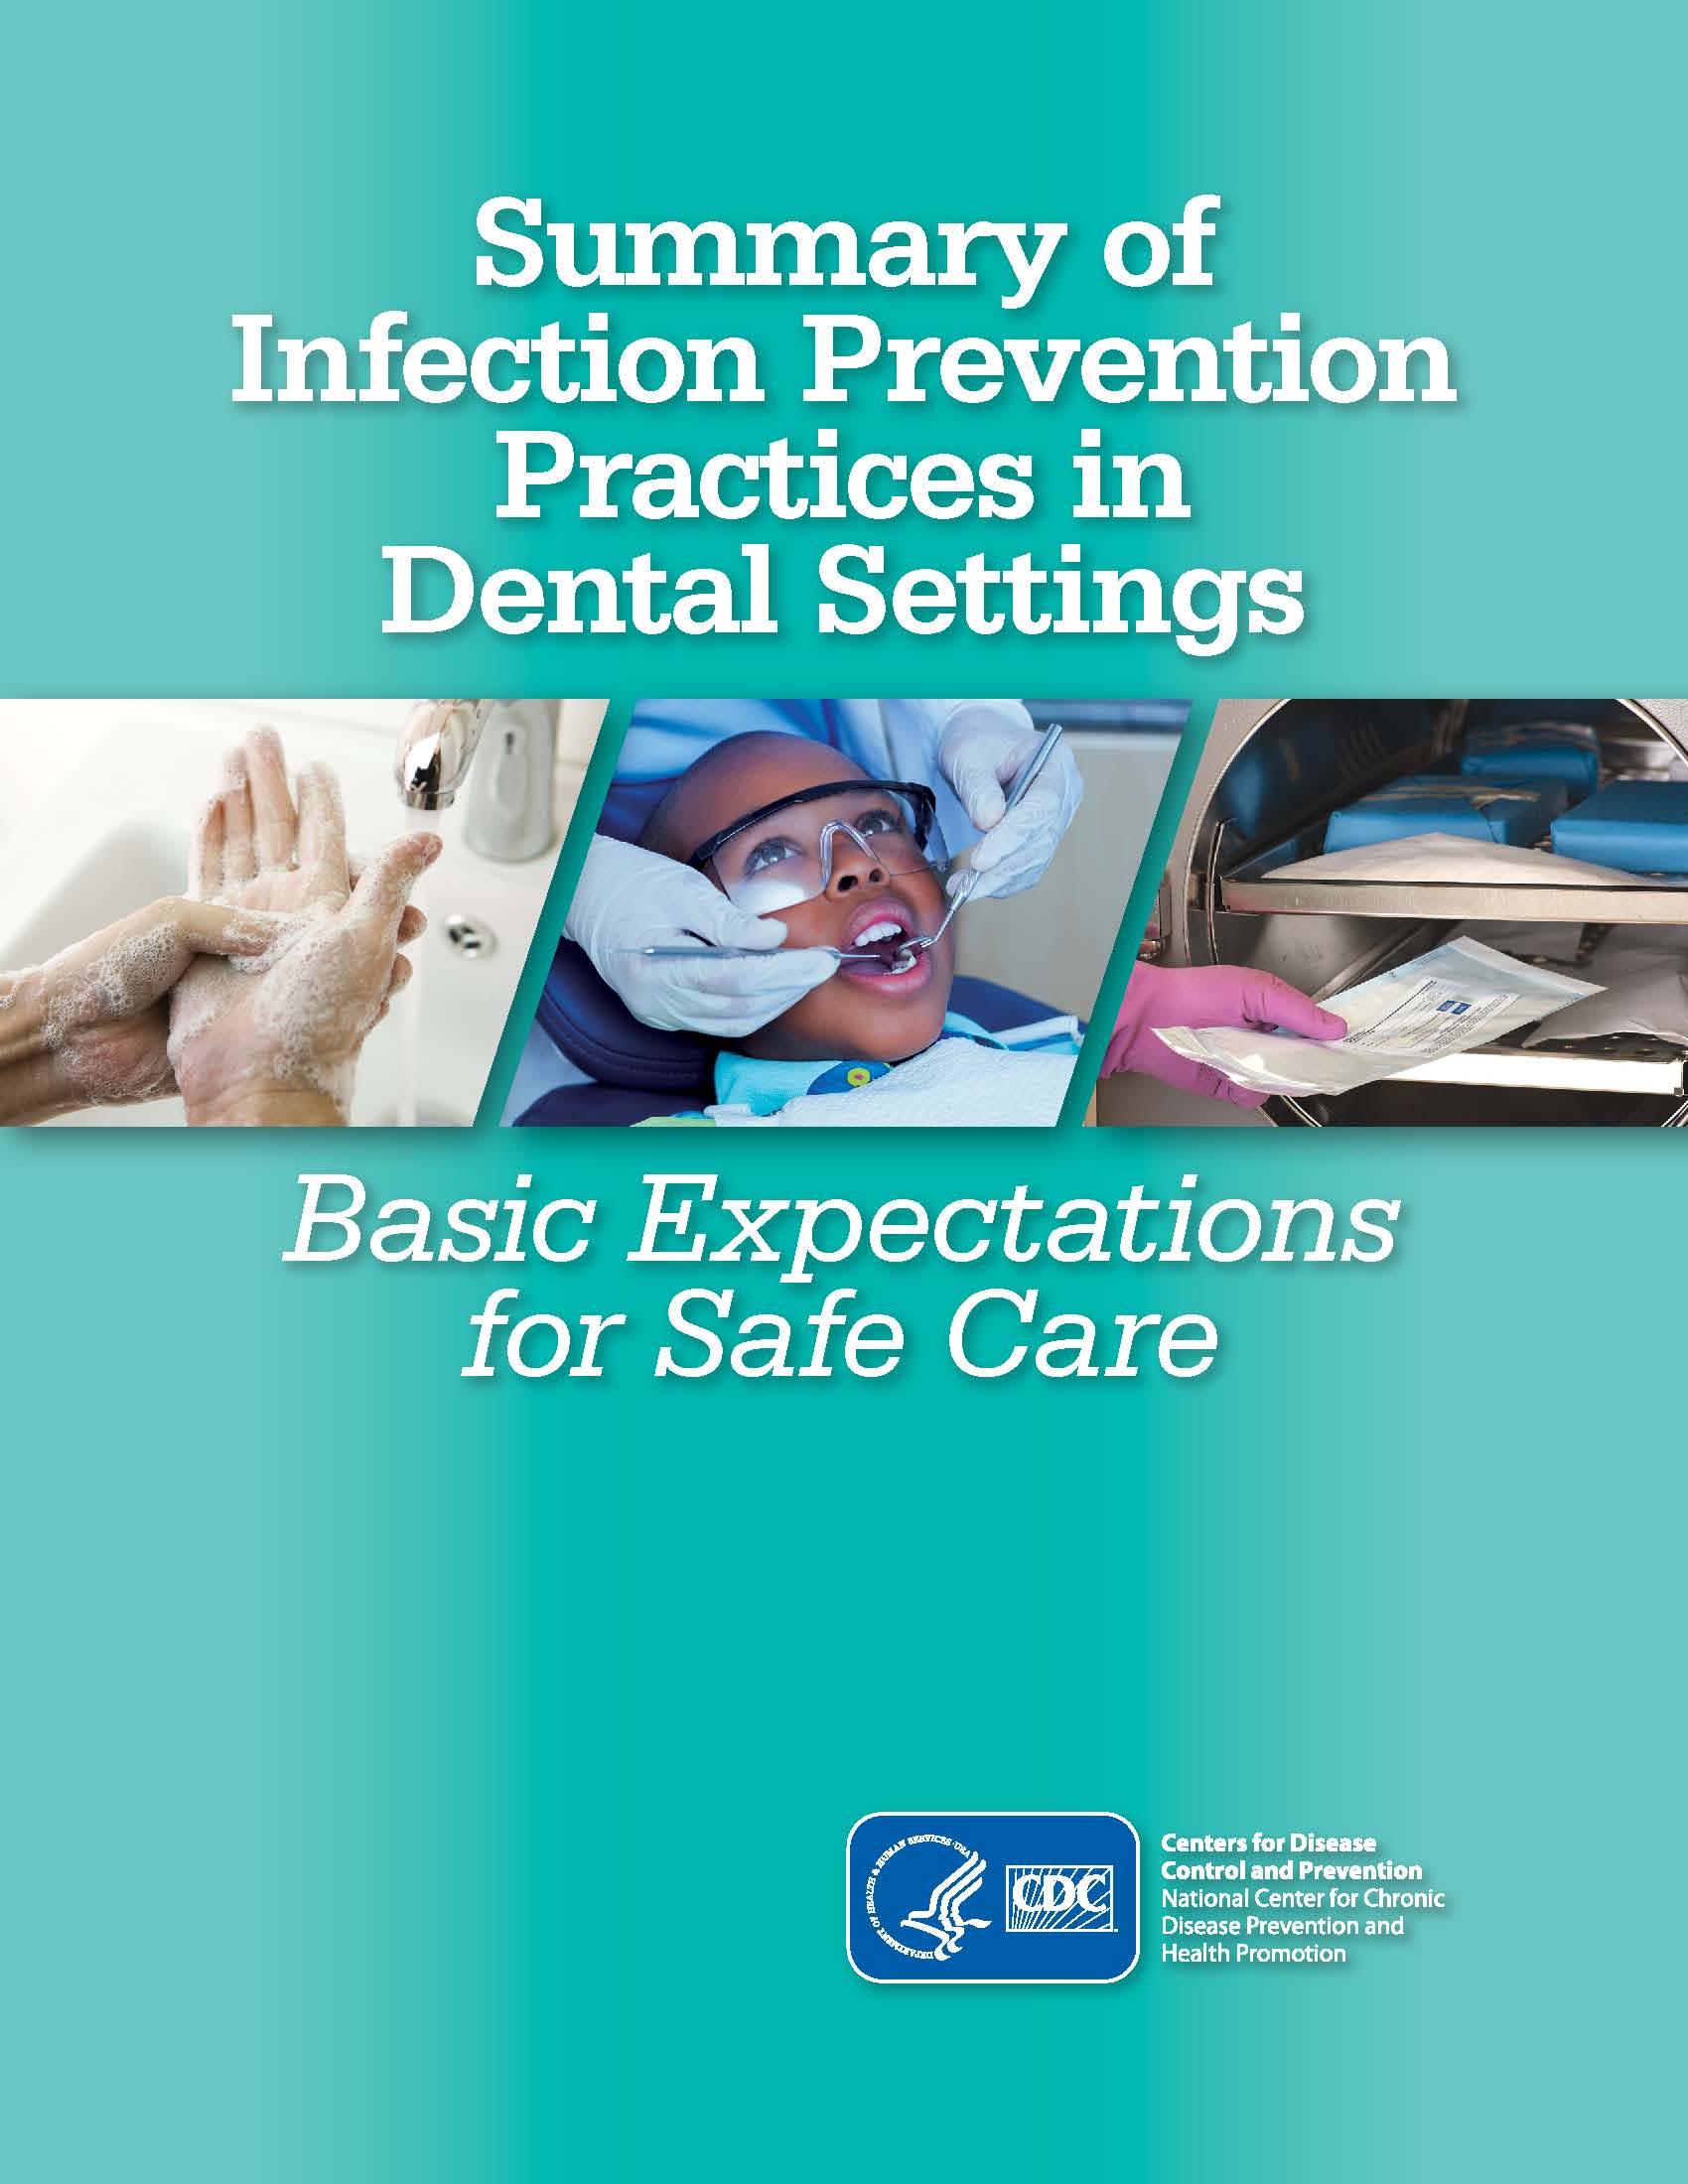 2016 CDC Guidelines for Infection Control in Dental Settings